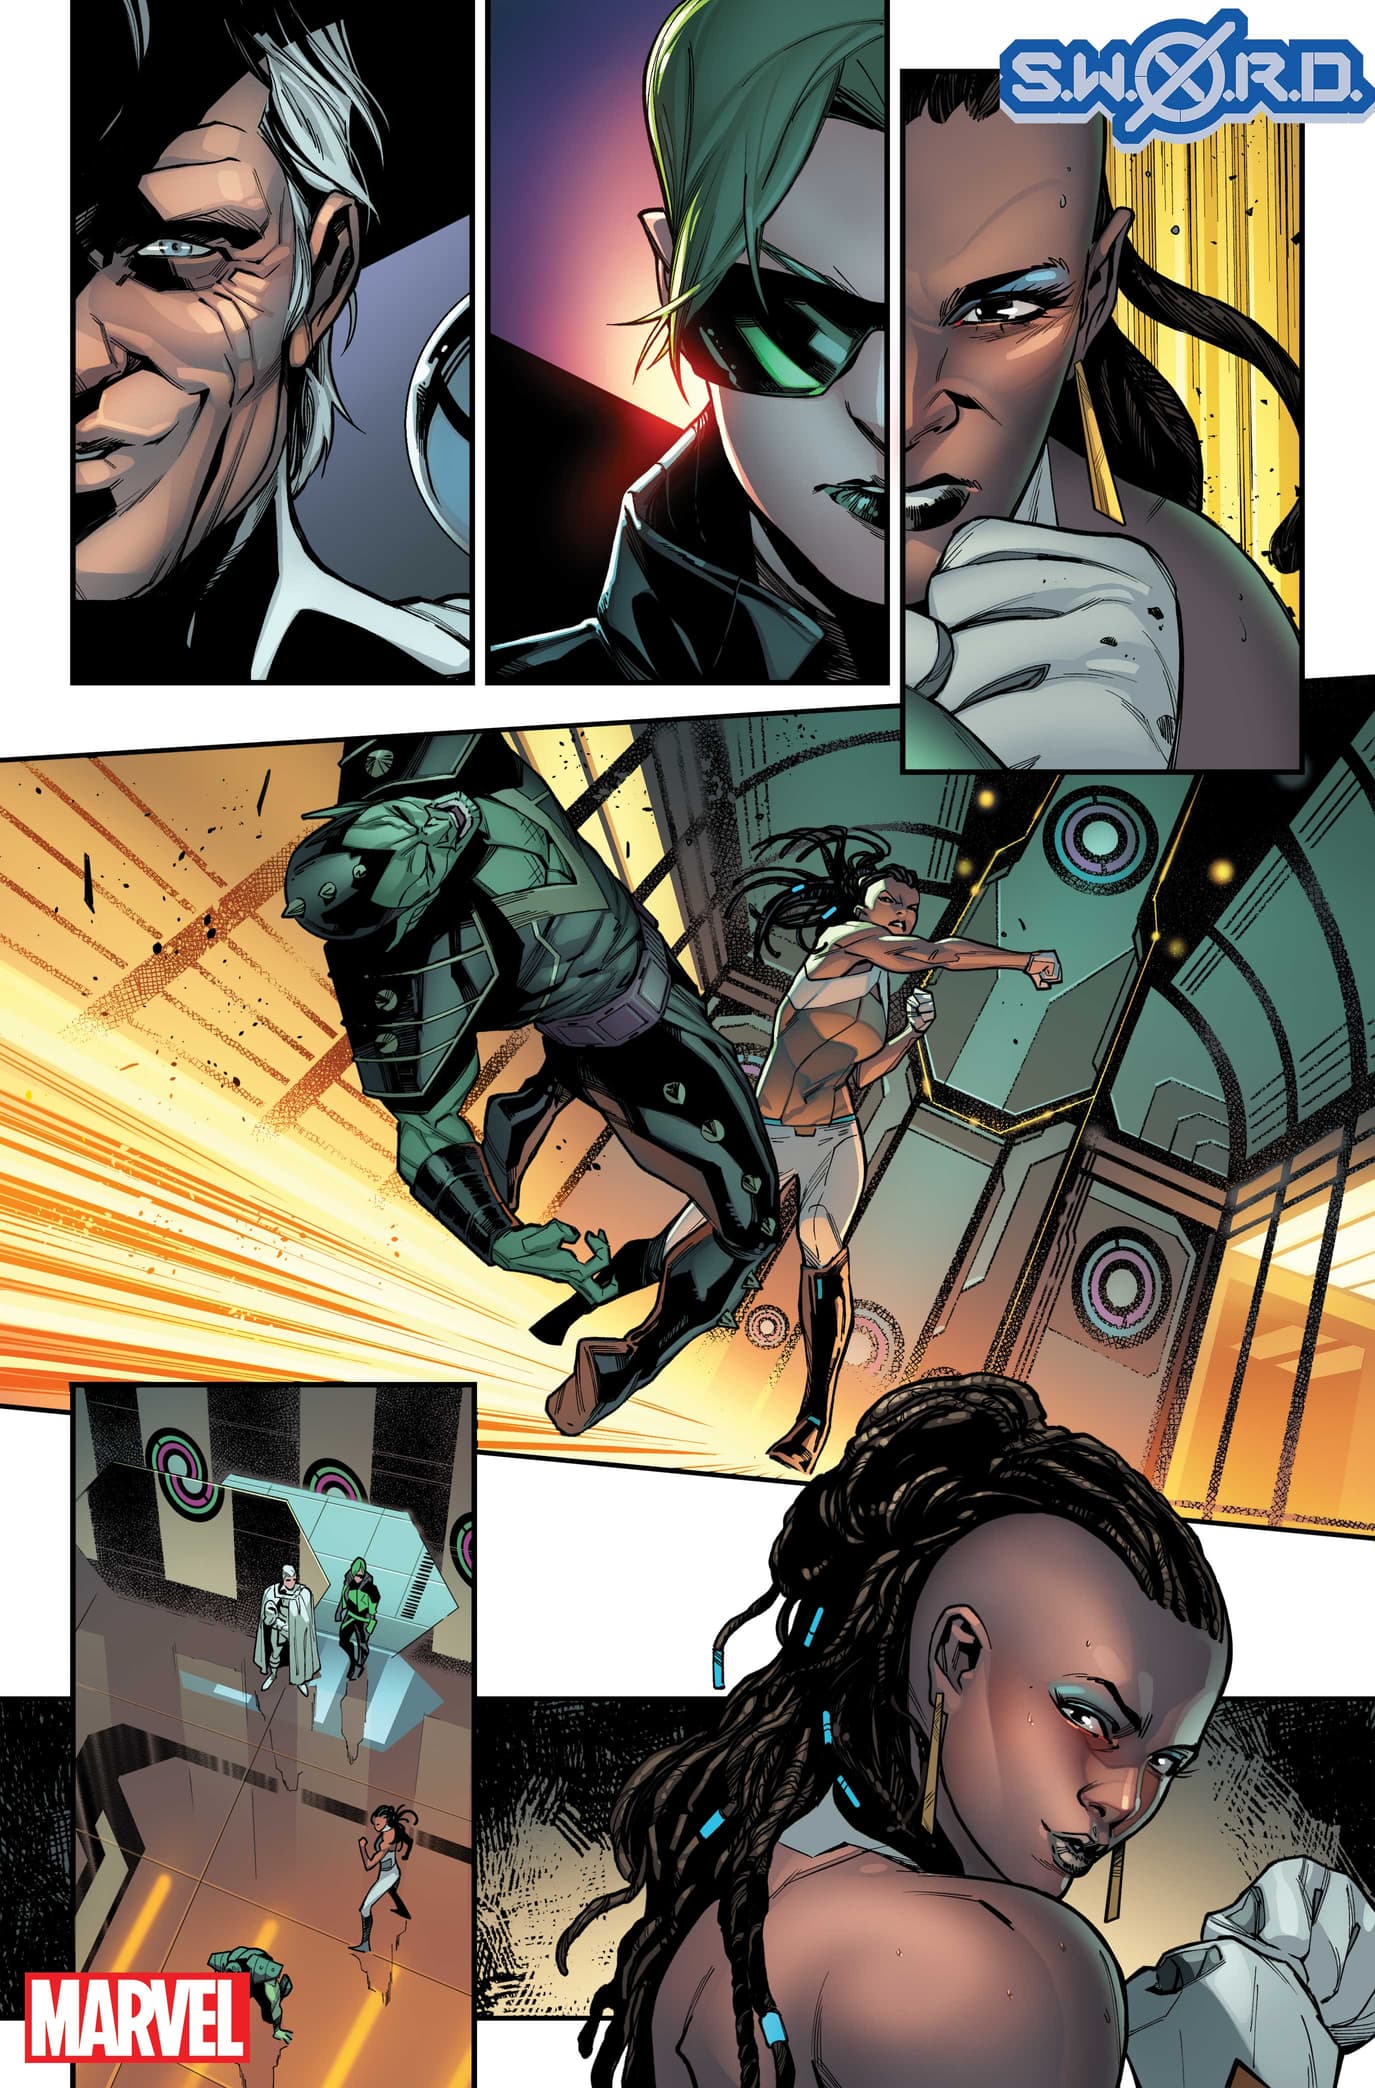 S.W.O.R.D. #1 preview pages by Valerio Schiti with colors by Marte Gracia